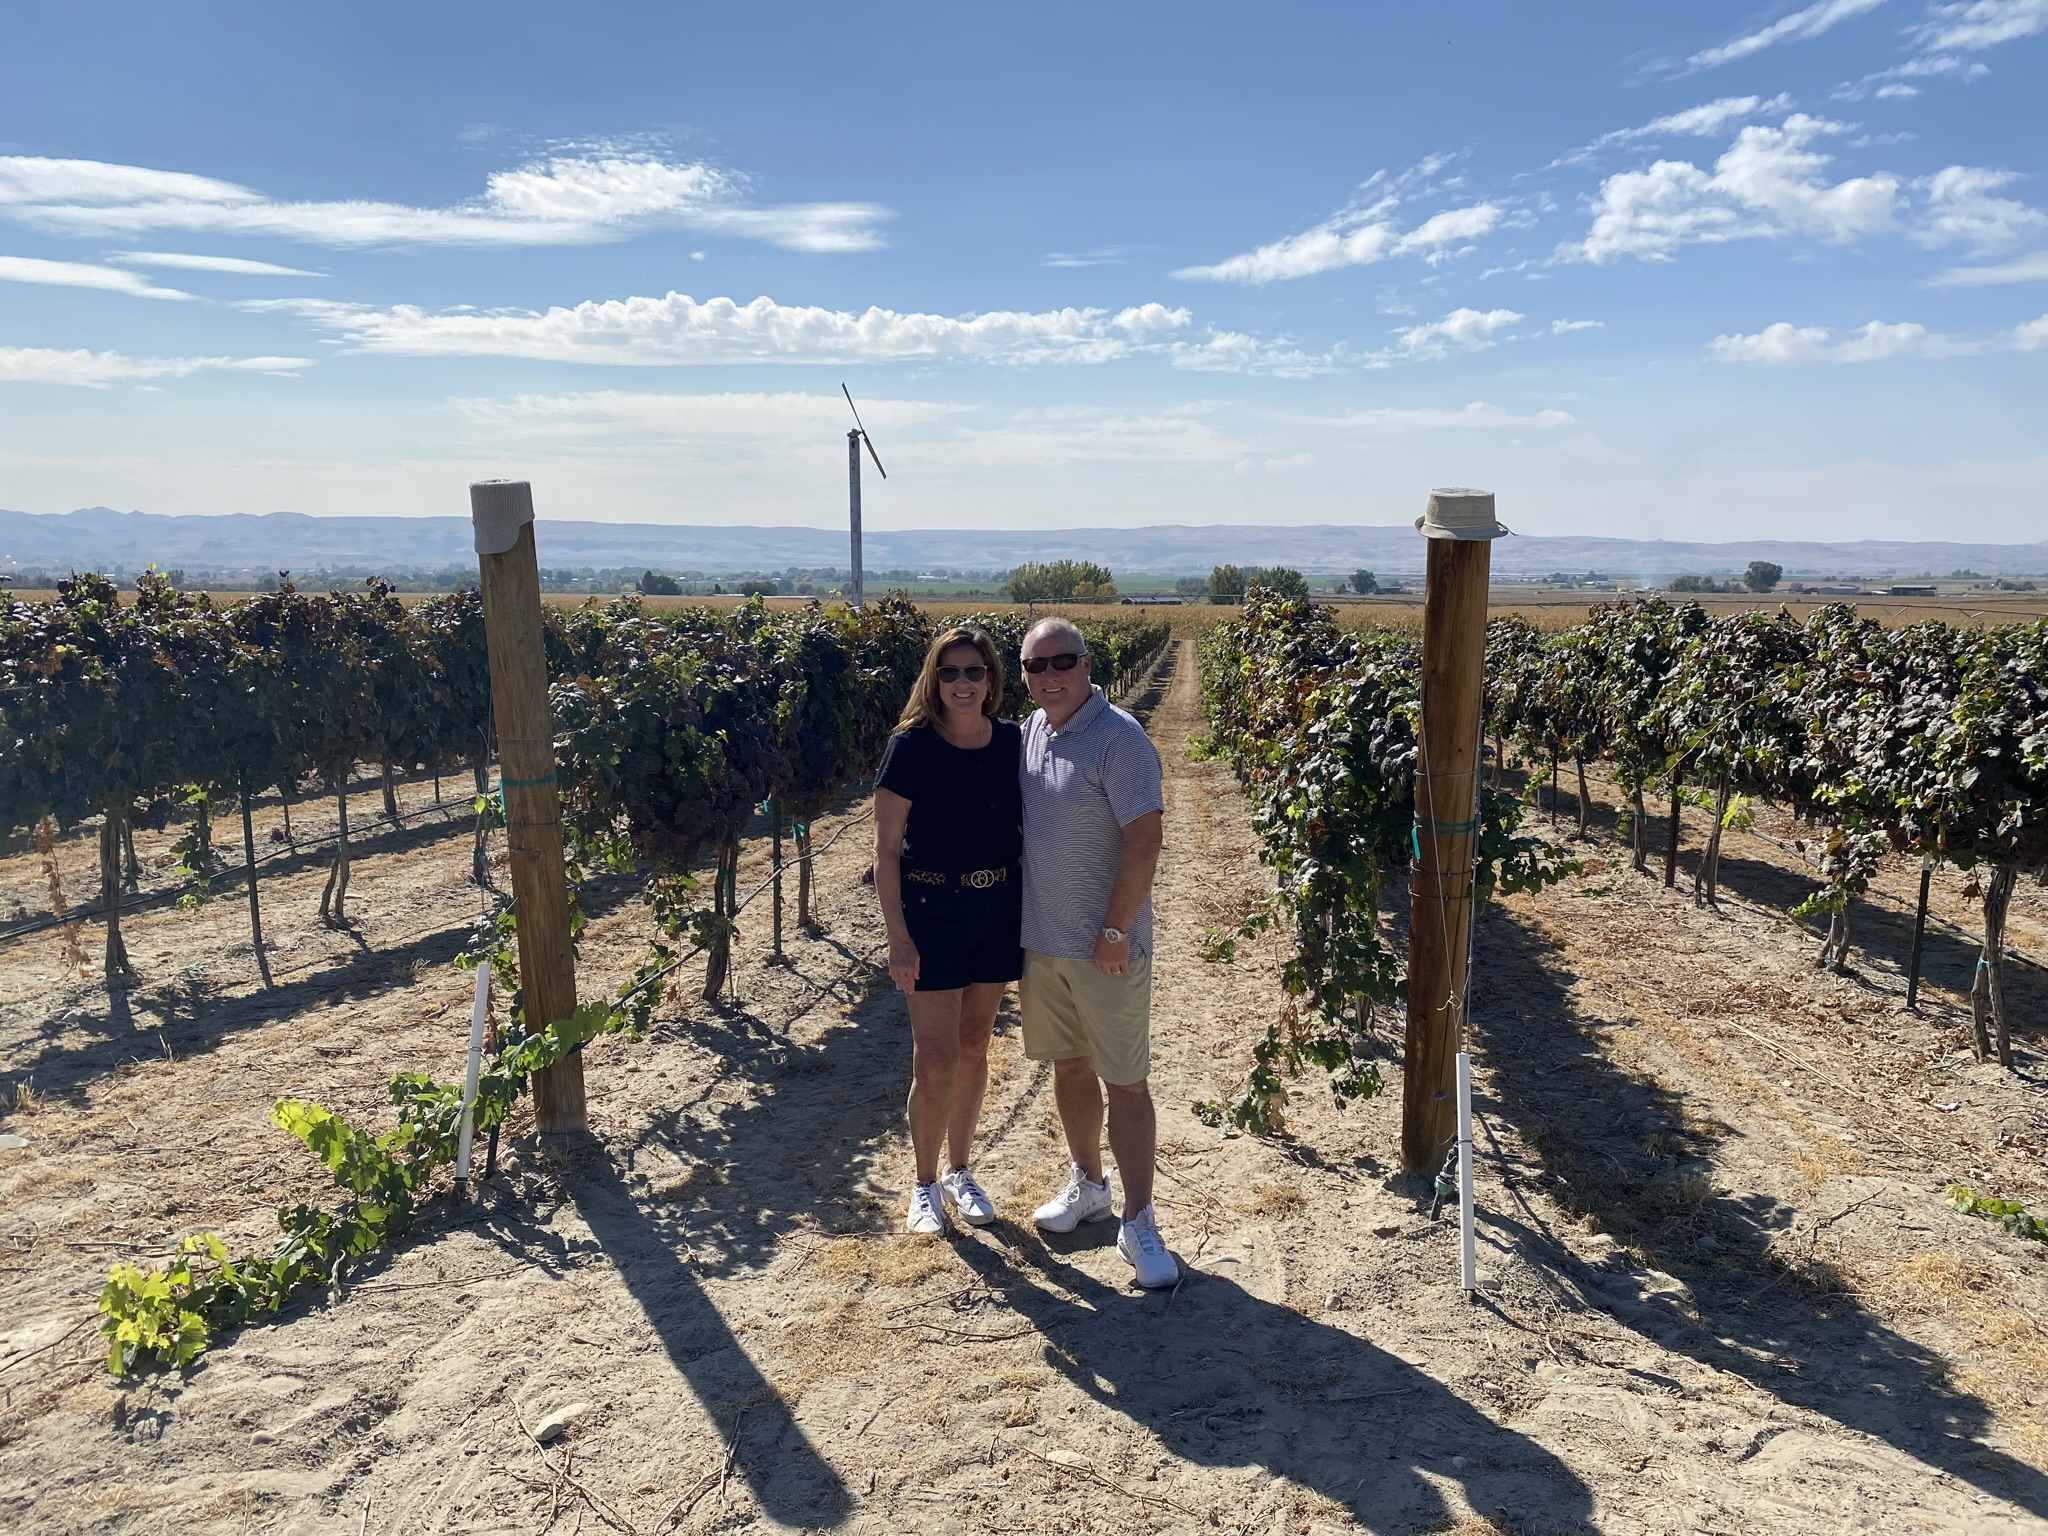 Explore These Three Hidden Gem Wineries with Idaho Wine Tours